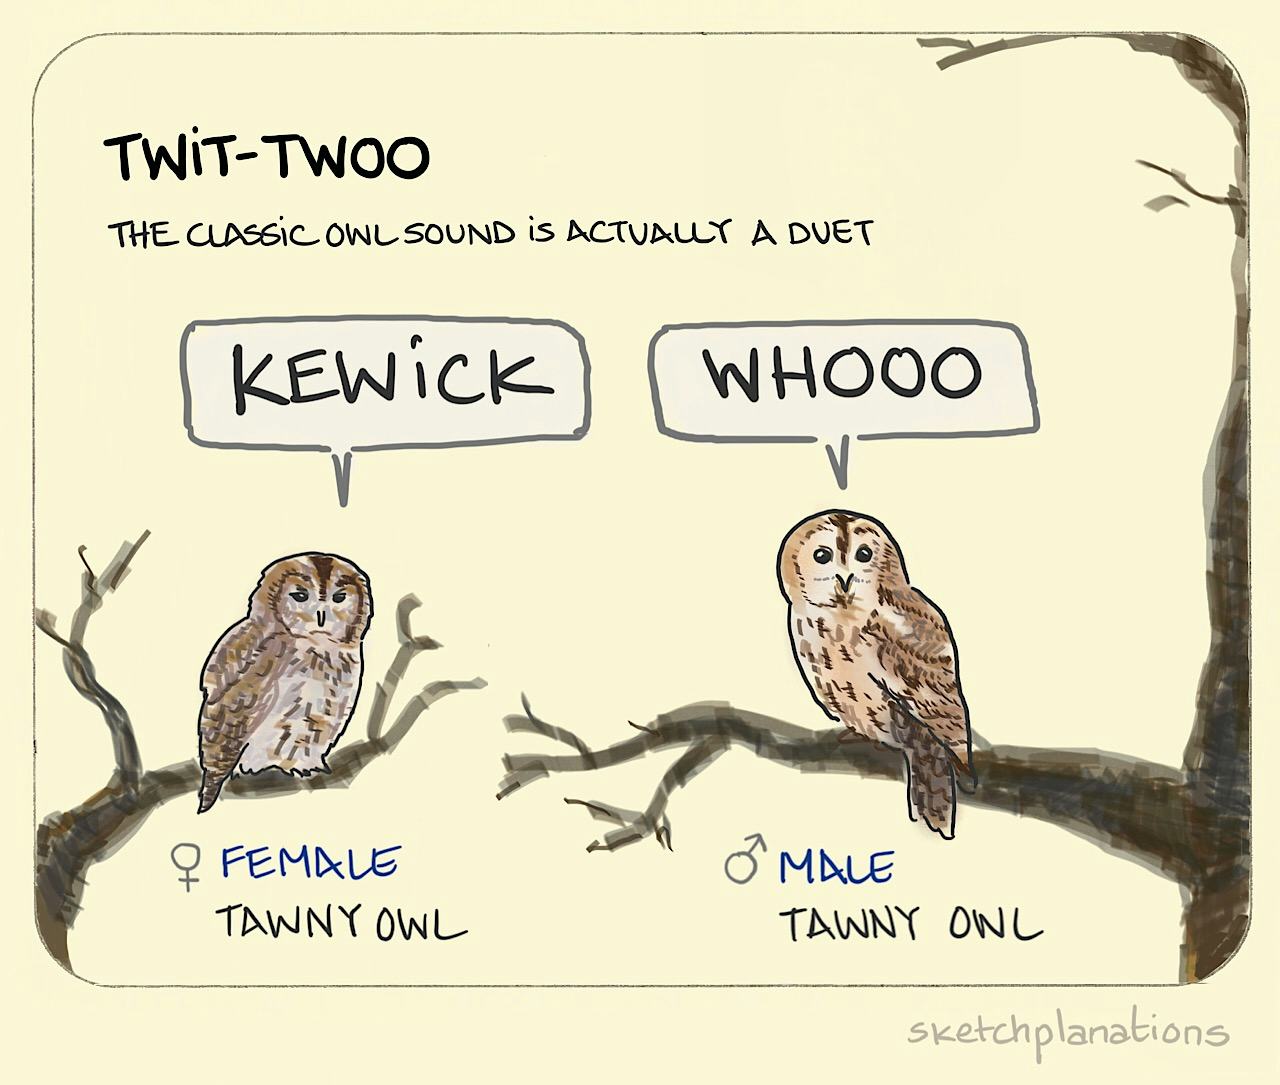 The classic twit-twoo is actually a duet - Sketchplanations